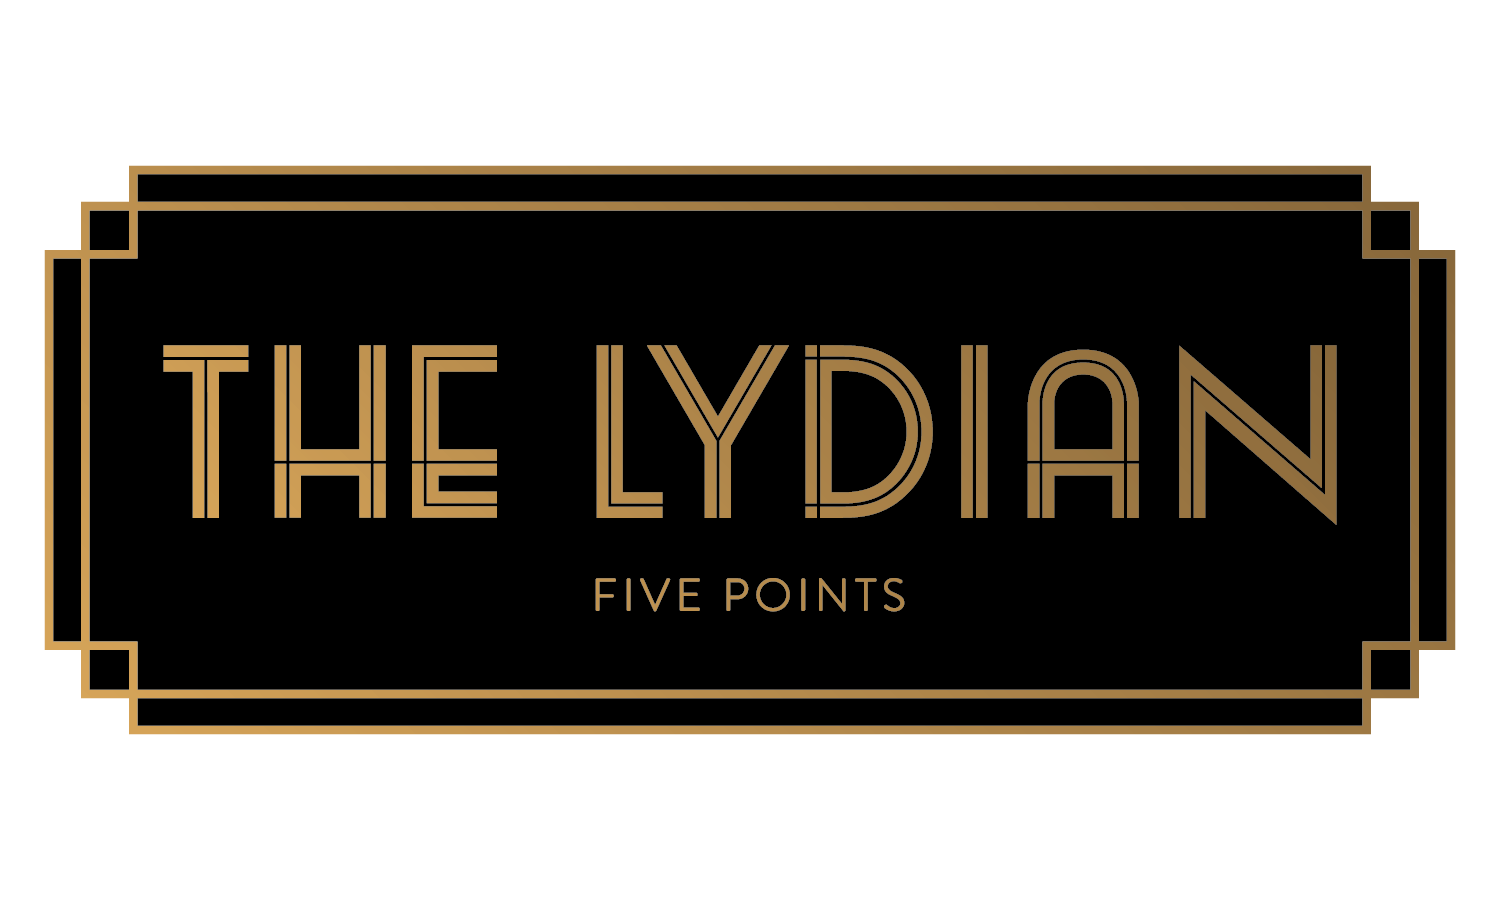 THE LYDIAN LOGO.full color